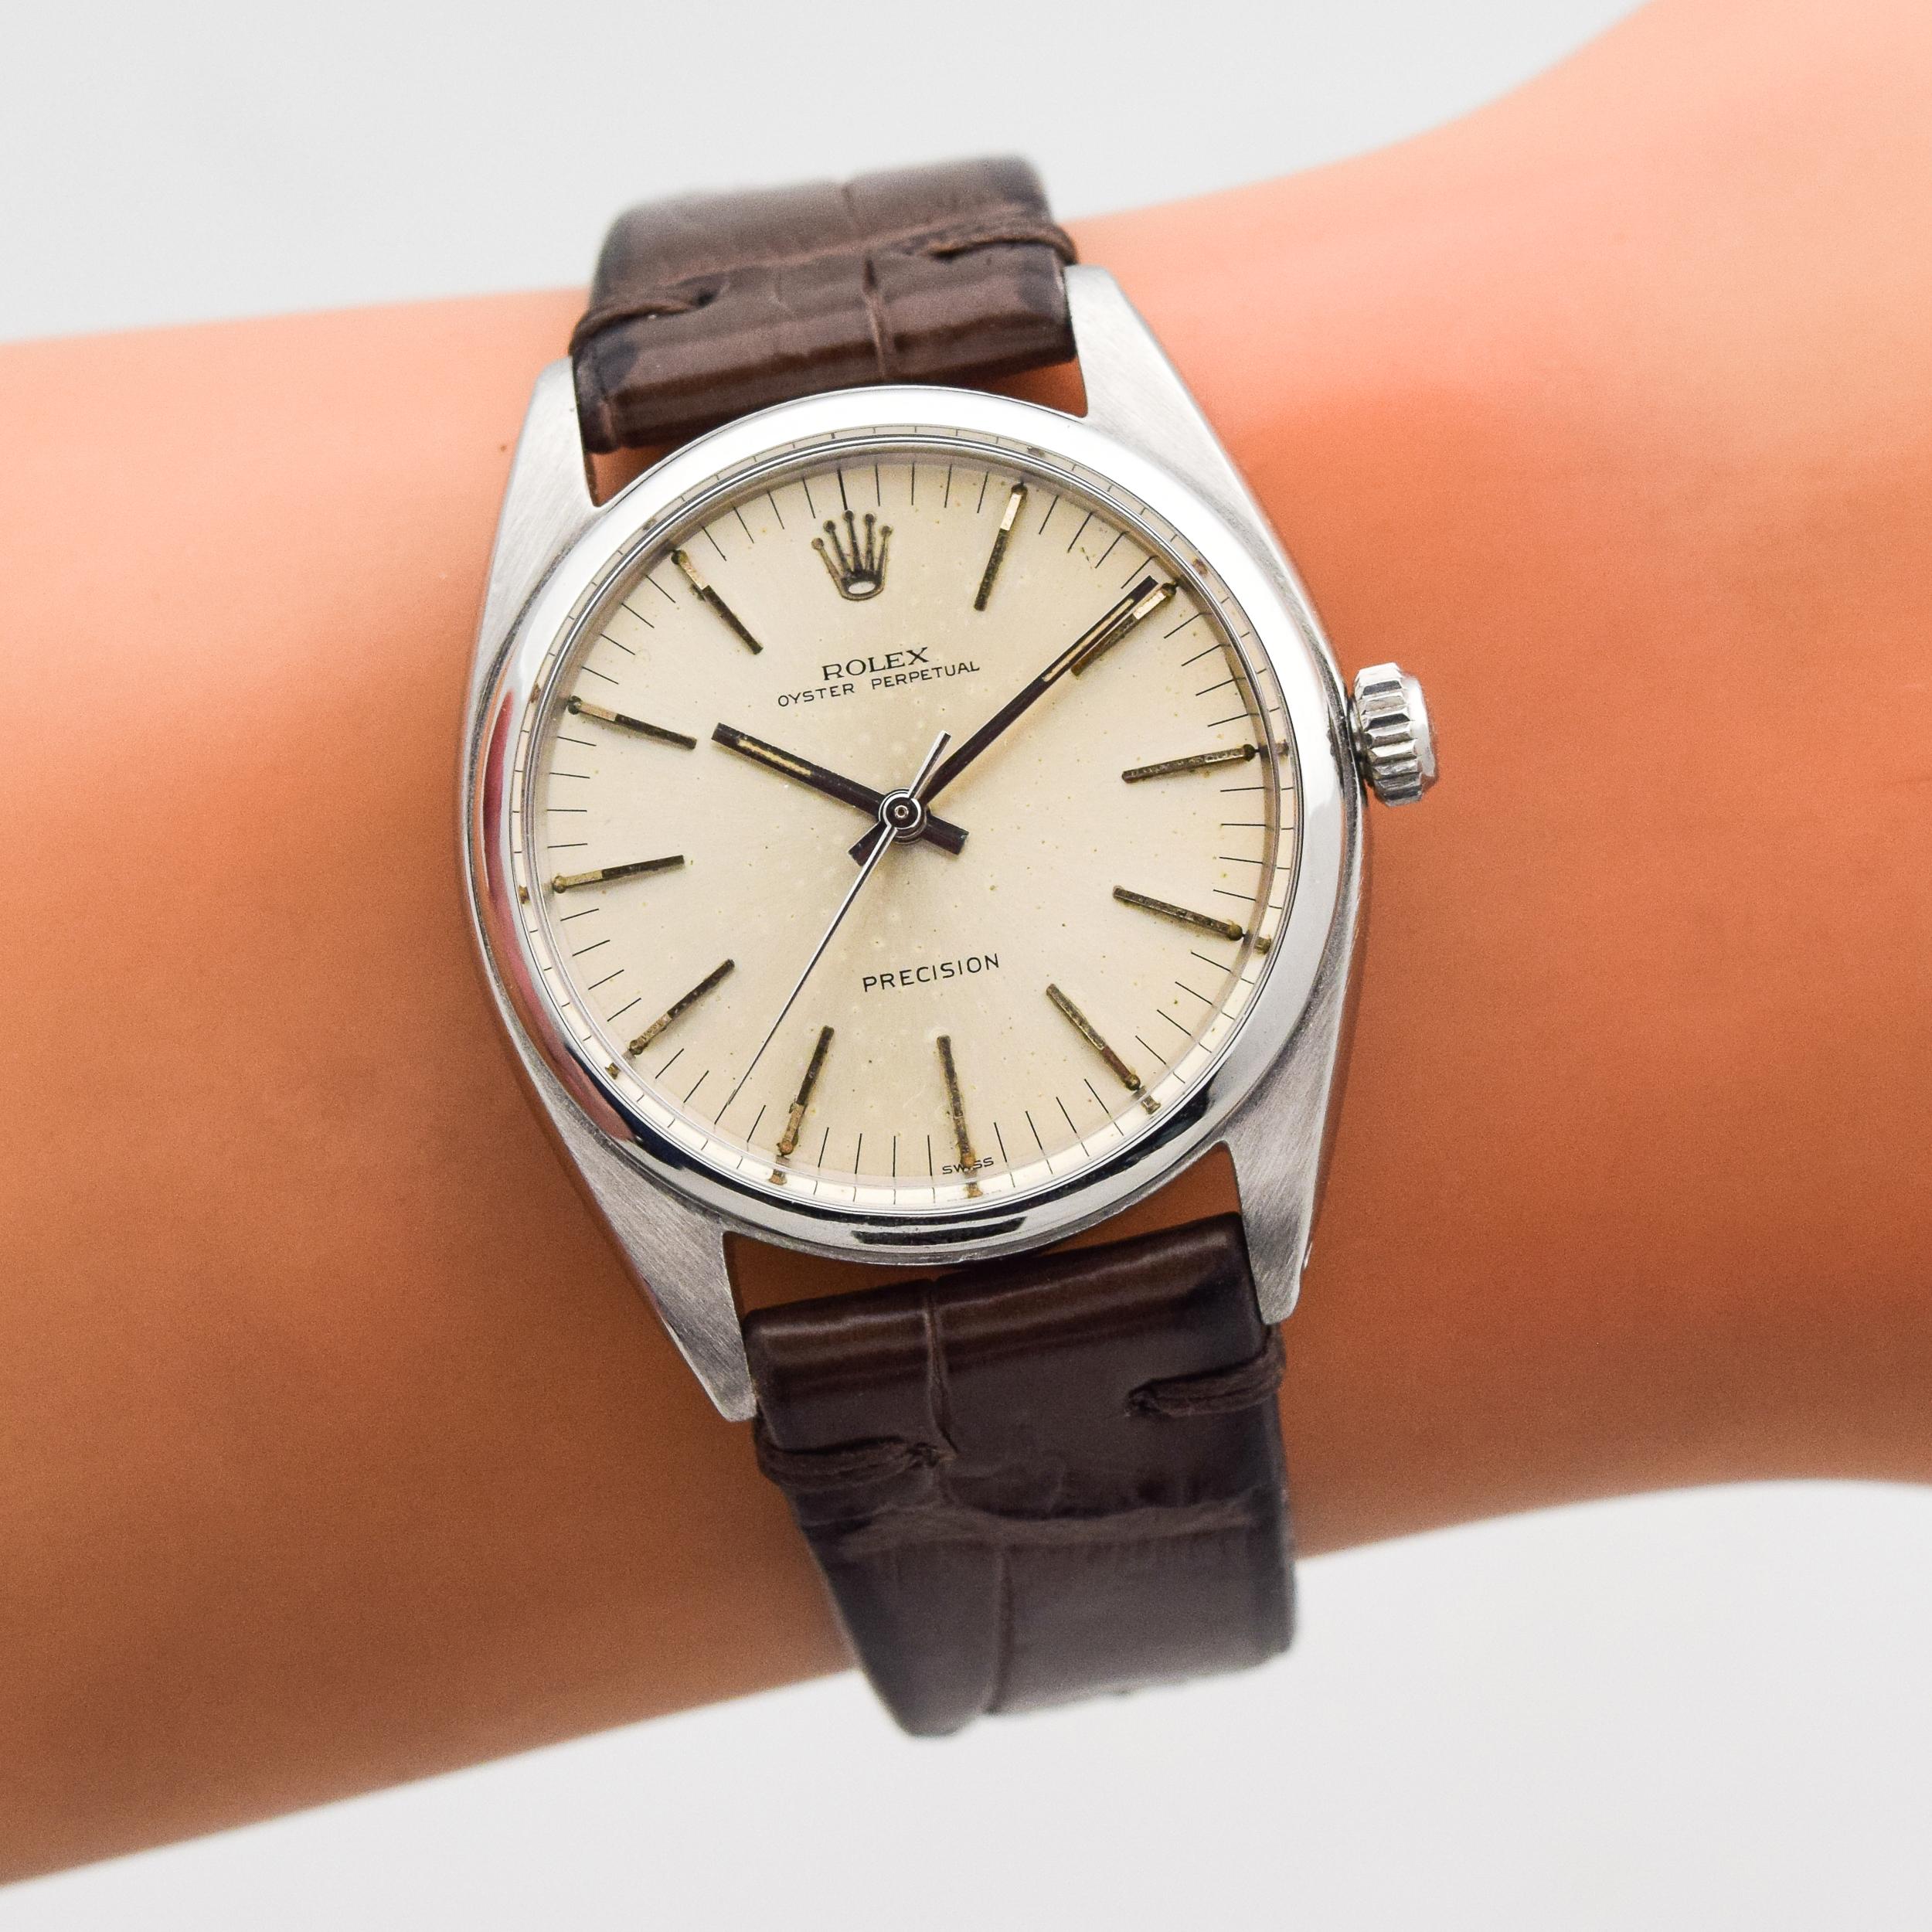 Vintage Rolex Oyster Perpetual Reference 6556 Stainless Steel Watch, 1961 For Sale 2